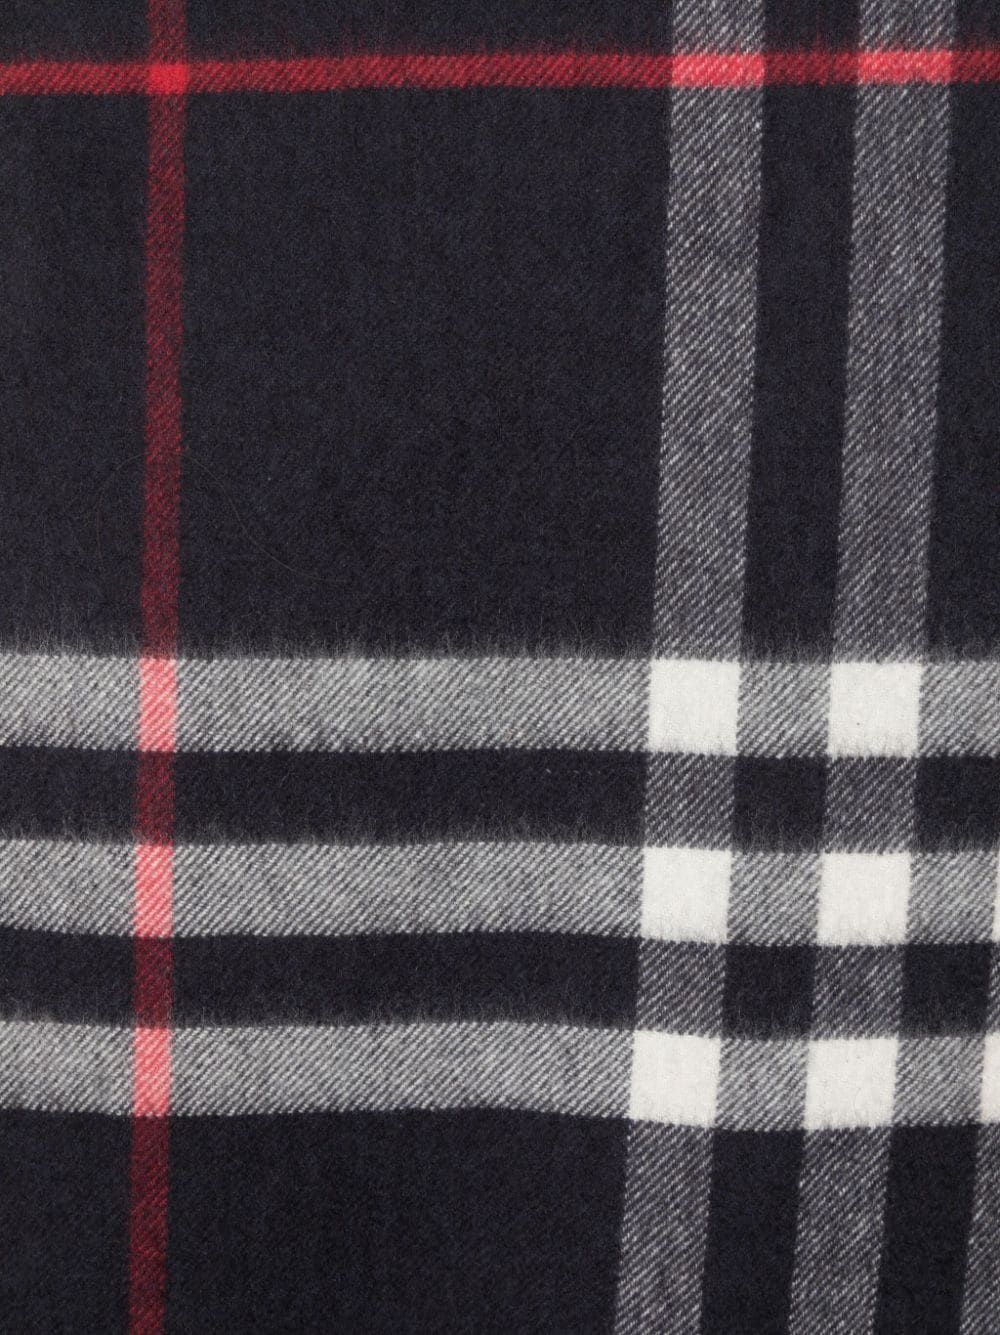 Cashmere scarf with tartan check pattern